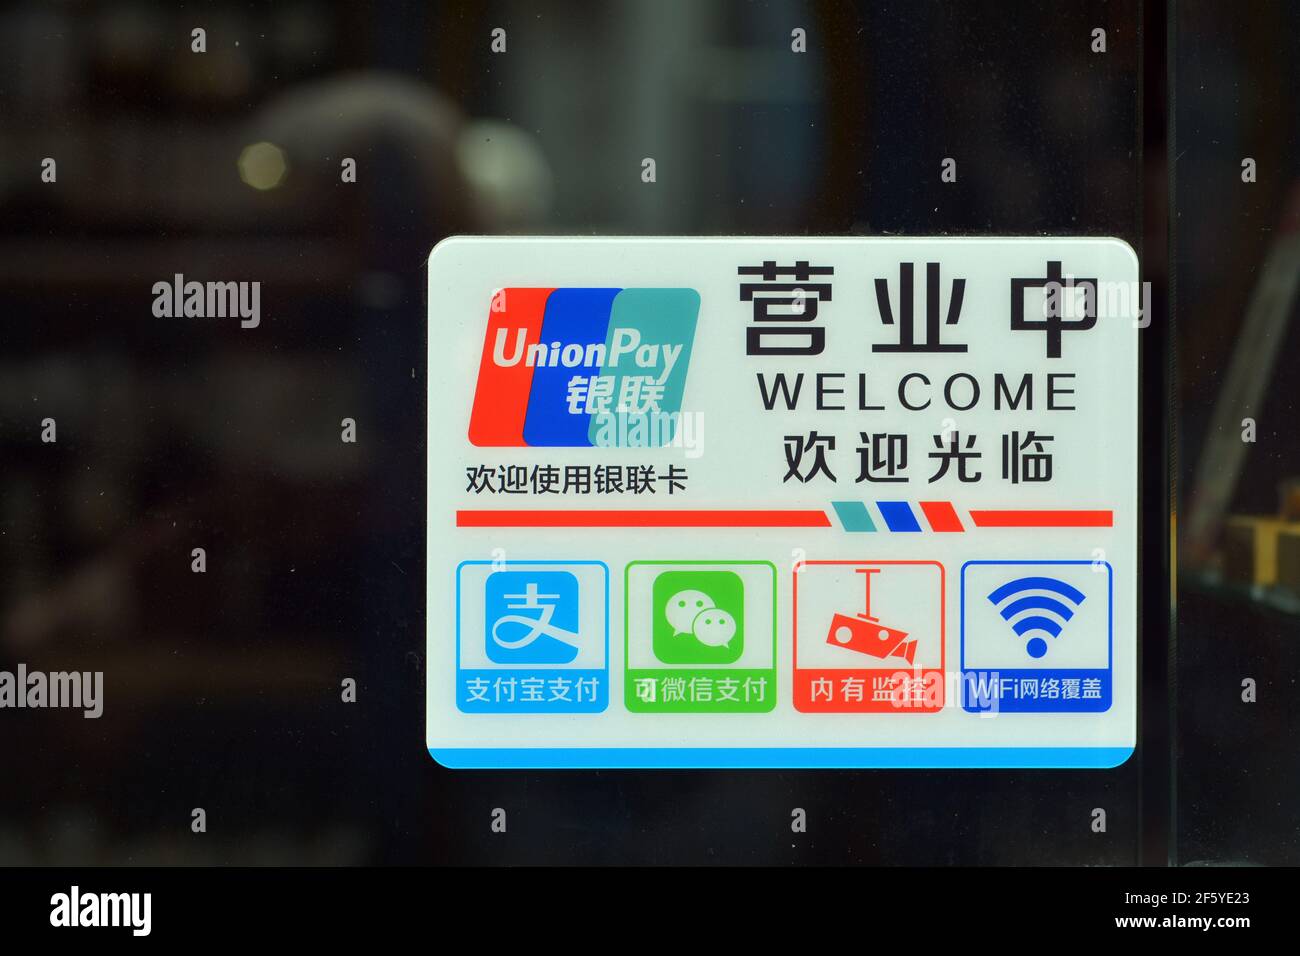 Sign on a door to a Chinese shop. Showing the common payment types of Alipay and Wechat as well as WIFI and security cameras. Stock Photo